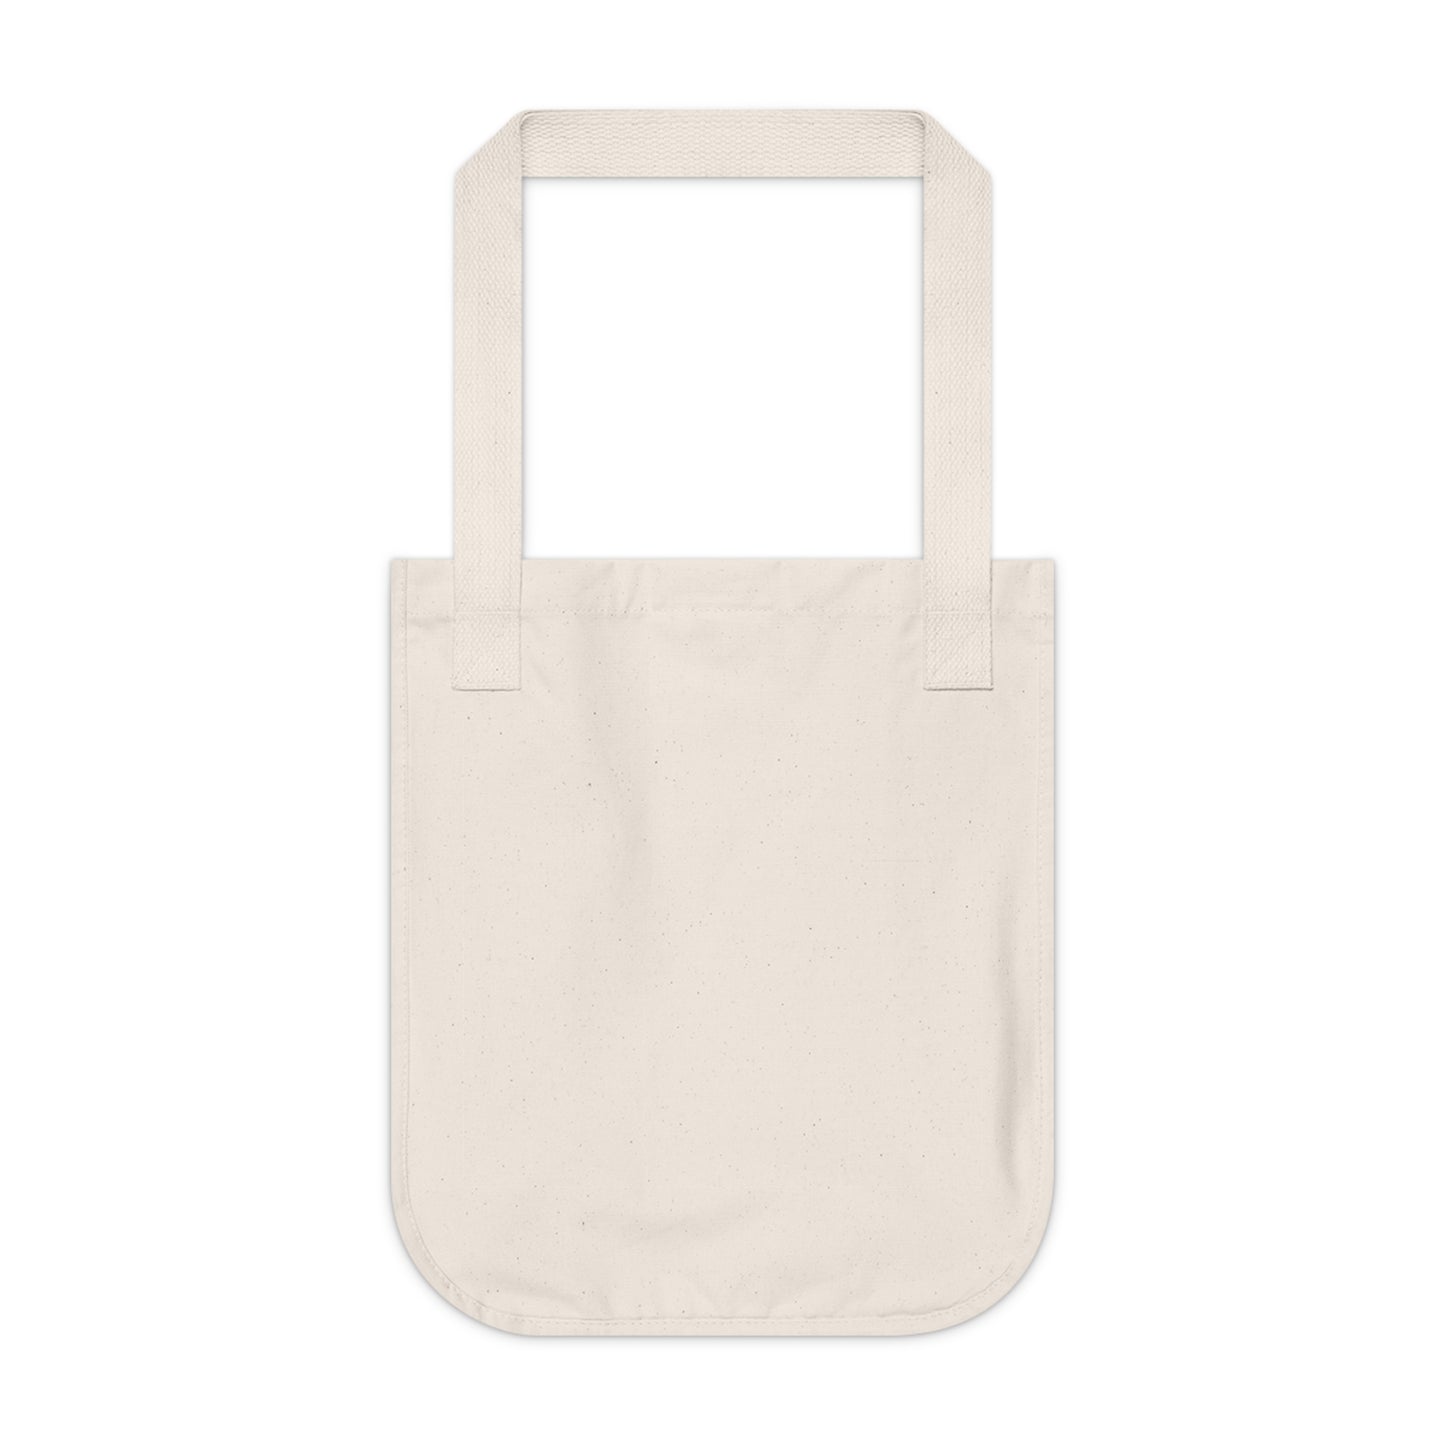 "In Colorful Minimalism" - Bam Boo! Lifestyle Eco-friendly Tote Bag